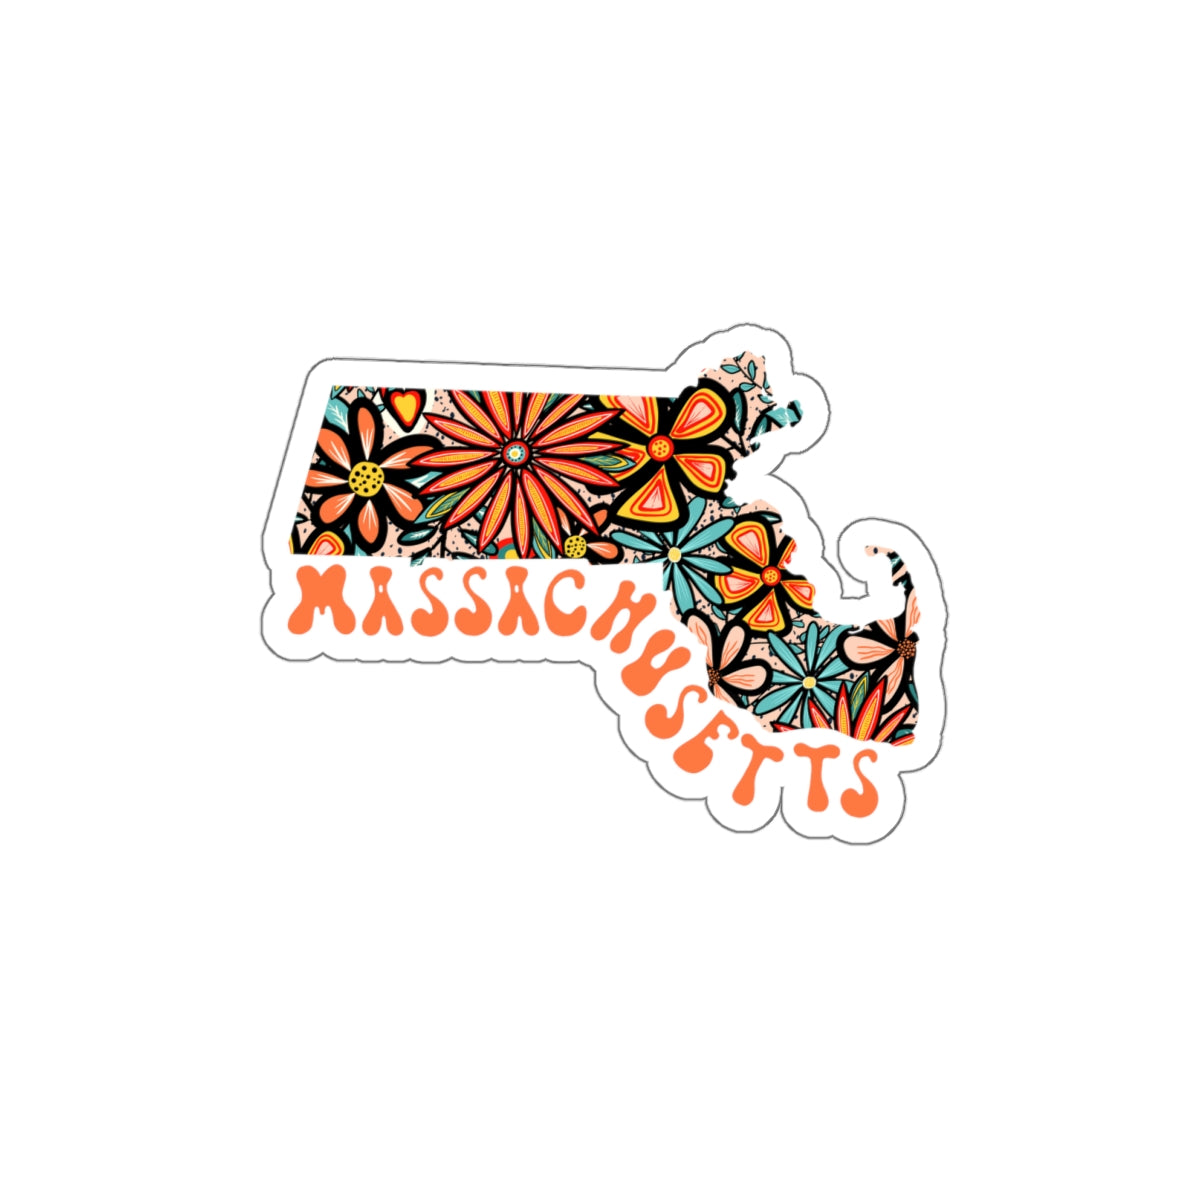 Massachusetts State Sticker | Vinyl Artist Designed Illustration Featuring Massachusetts State Outline Filled With Retro Flowers with Retro Hand-Lettering Die-Cut Stickers